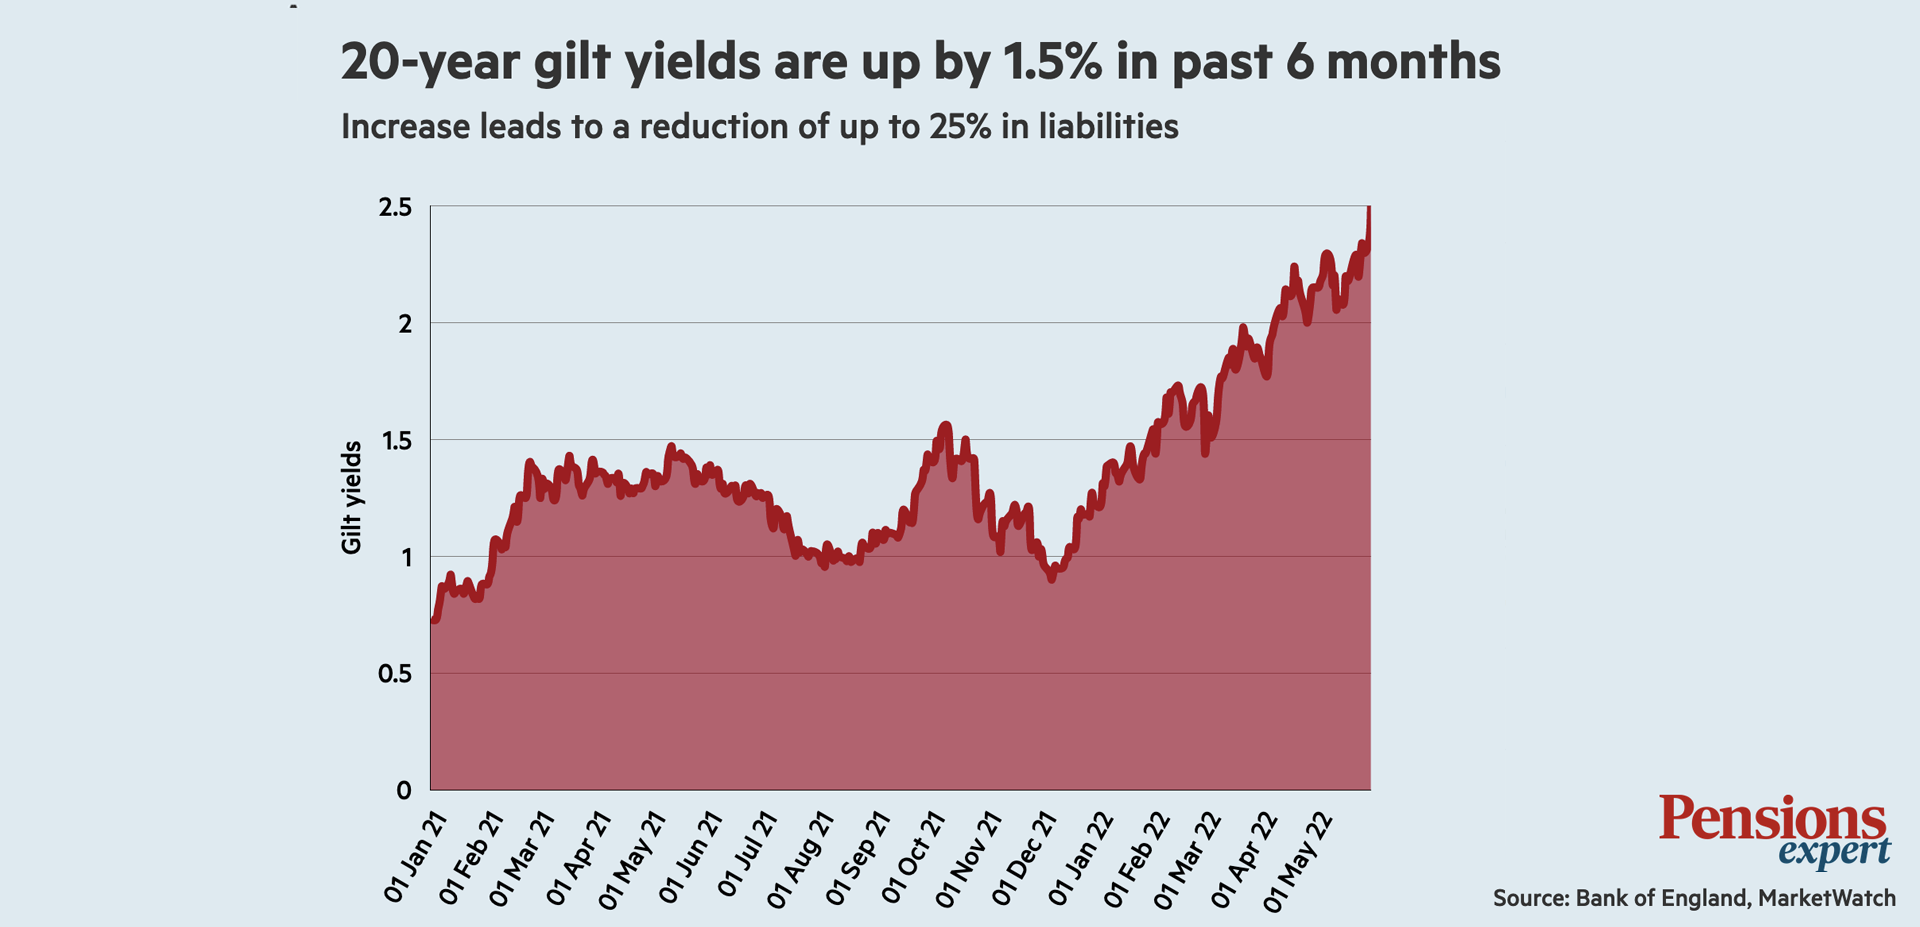 20-year gilt yields are up by 1.5 per cent in past 6 months